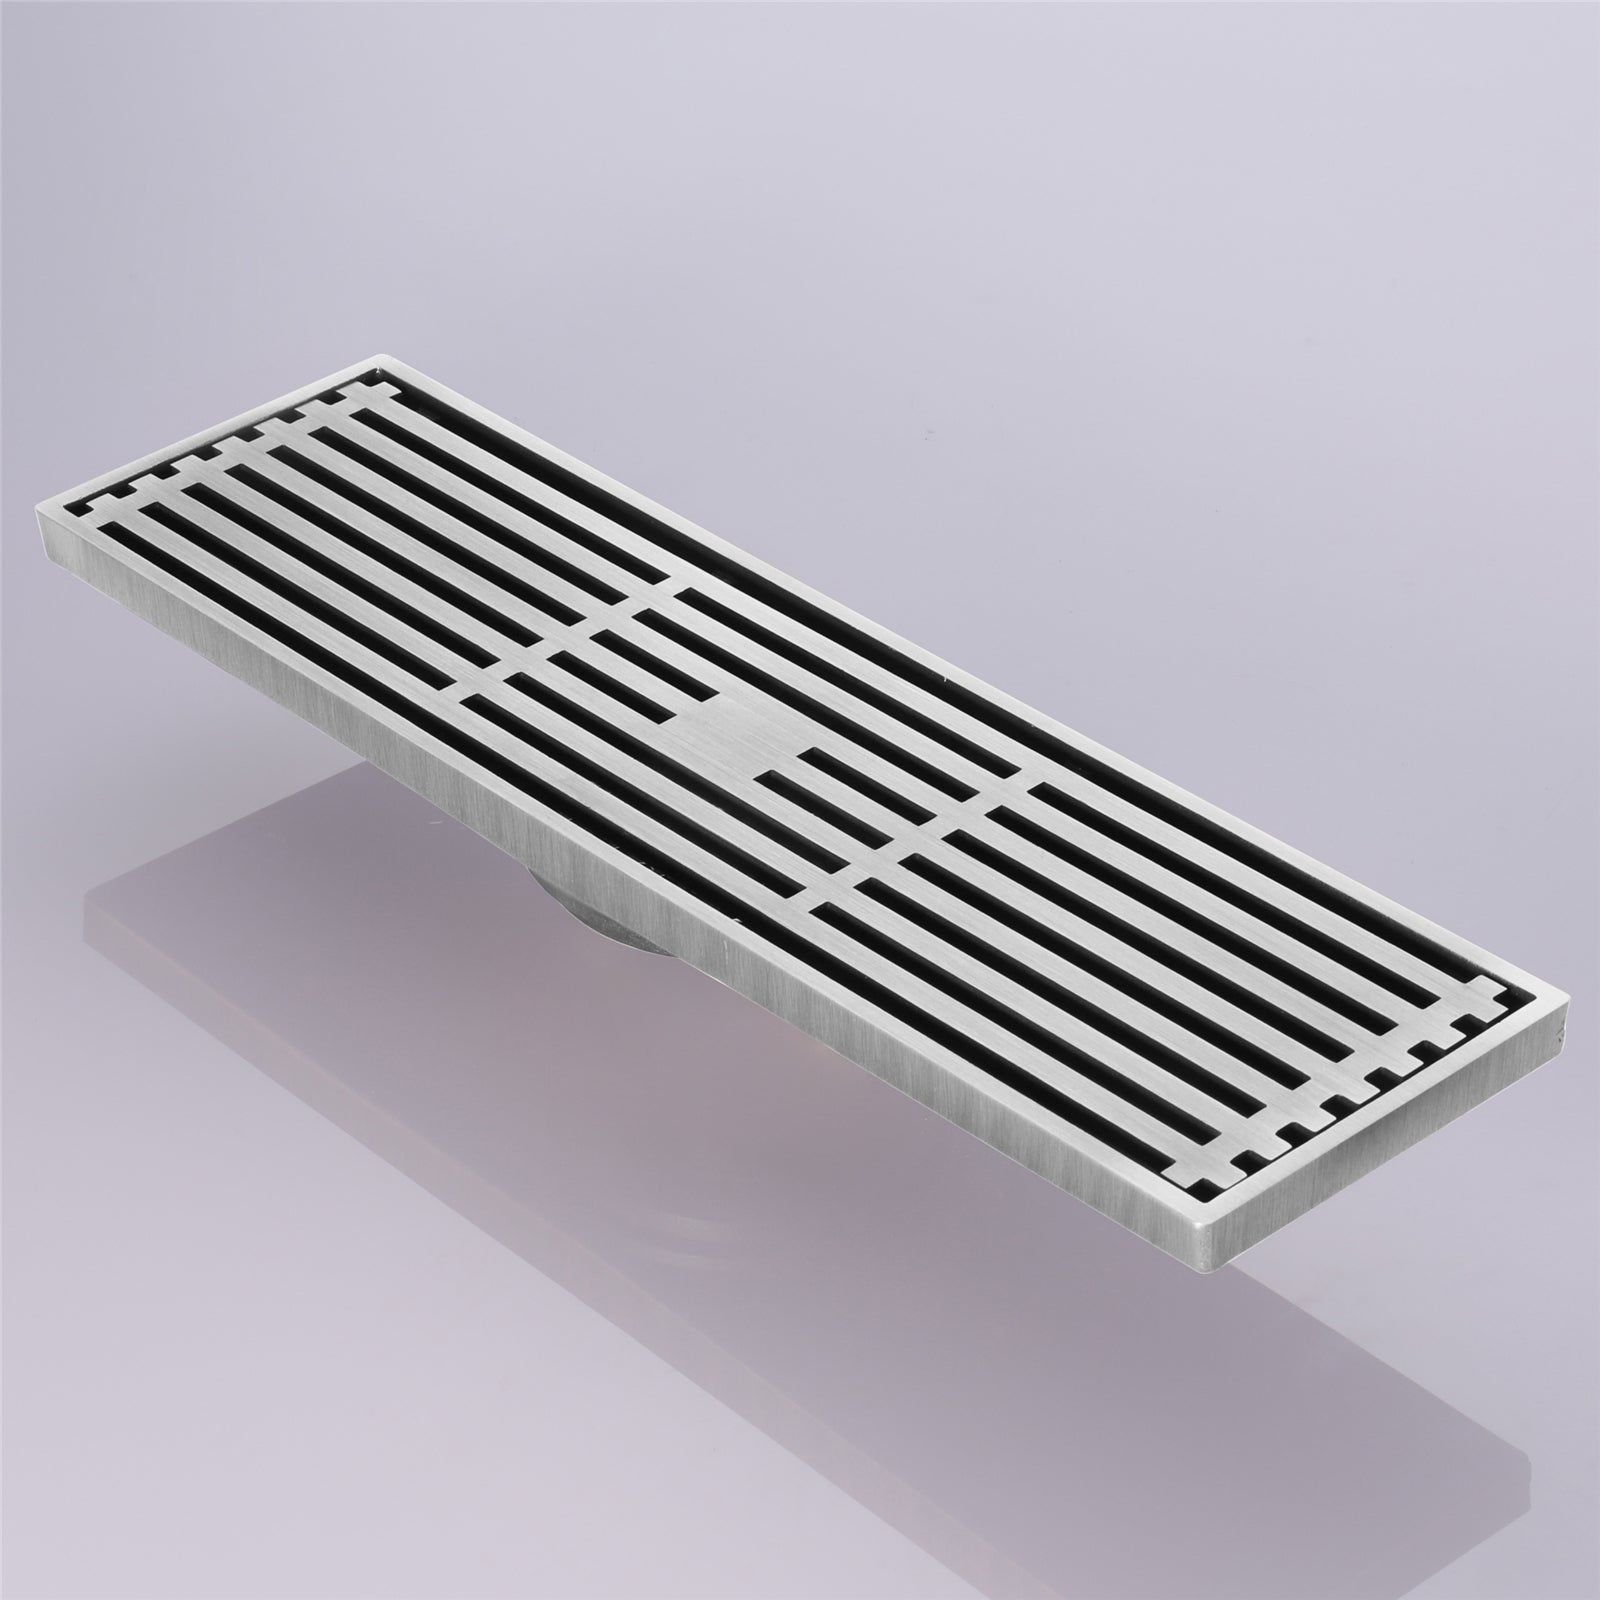 12-Inch Brushed Nickel Rectangular Floor Drain - Square Hole Pattern Cover Grate - Removable - Includes Accessories